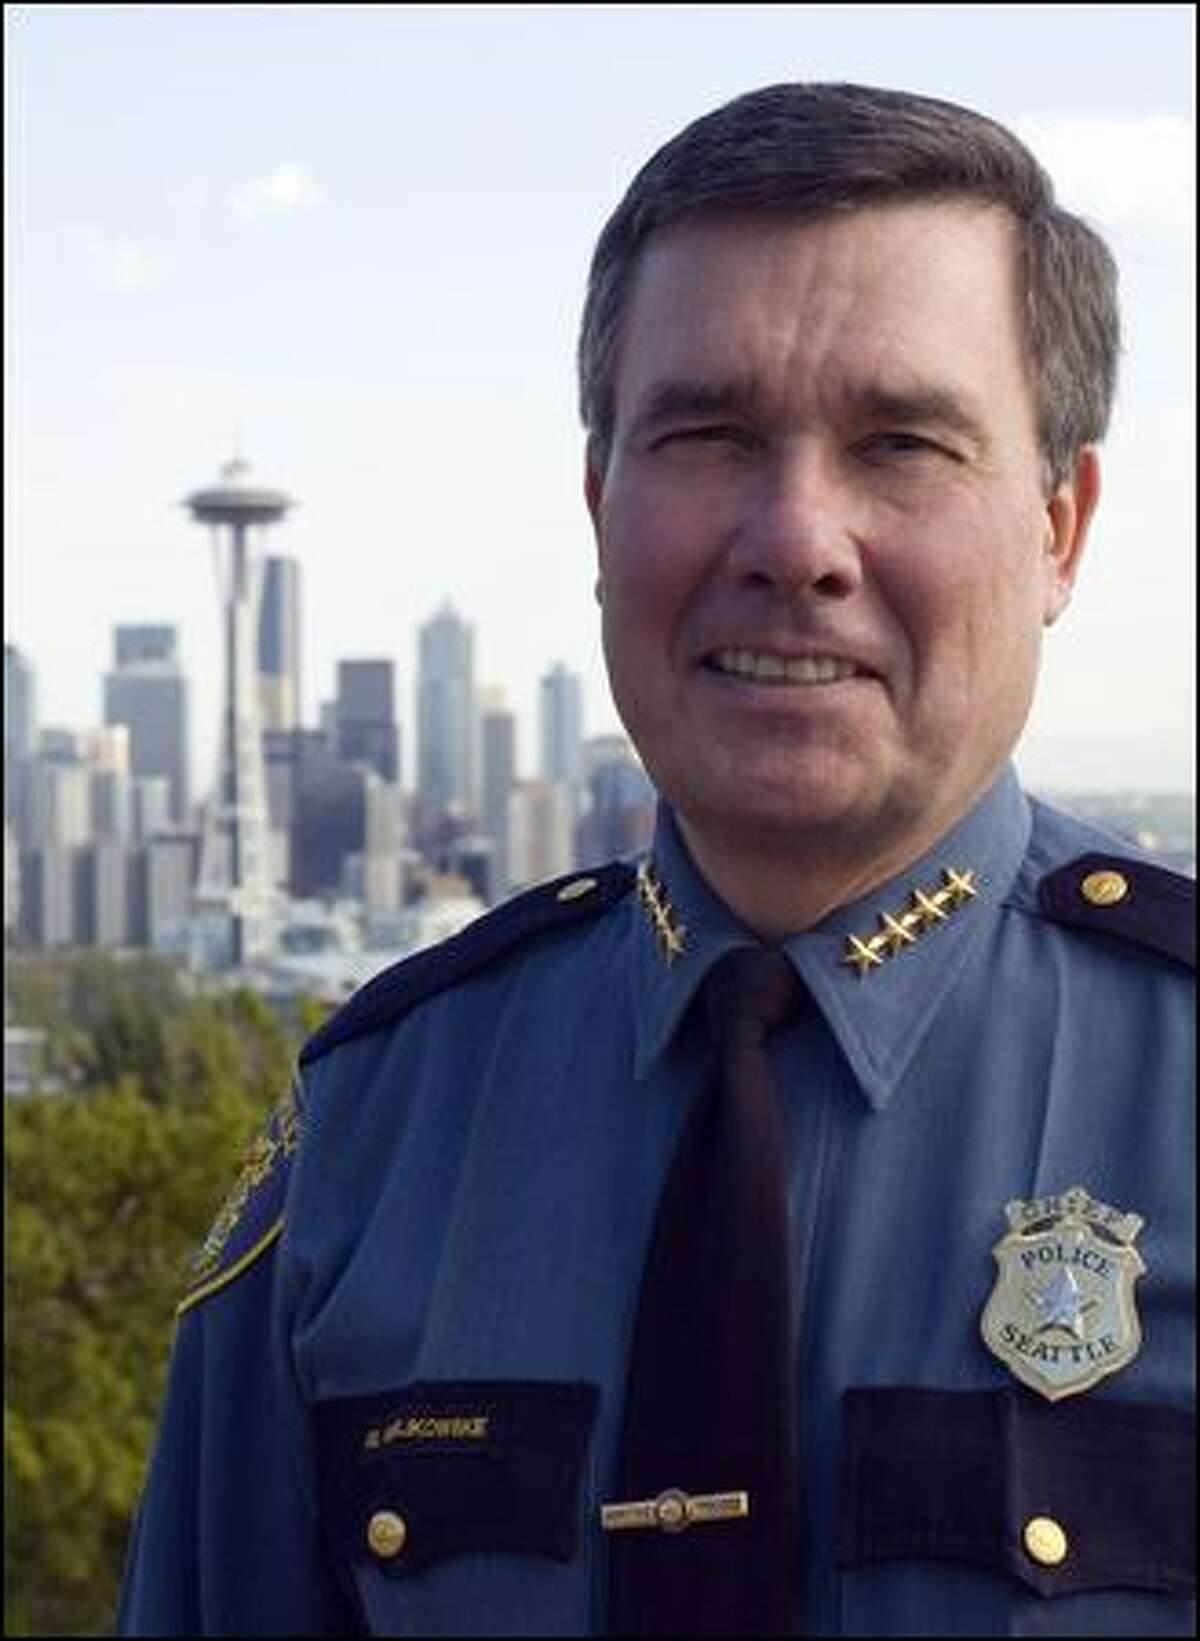 Gil Kerlikowske, who previously worked in Washington, D.C., has been police chief since 2000.